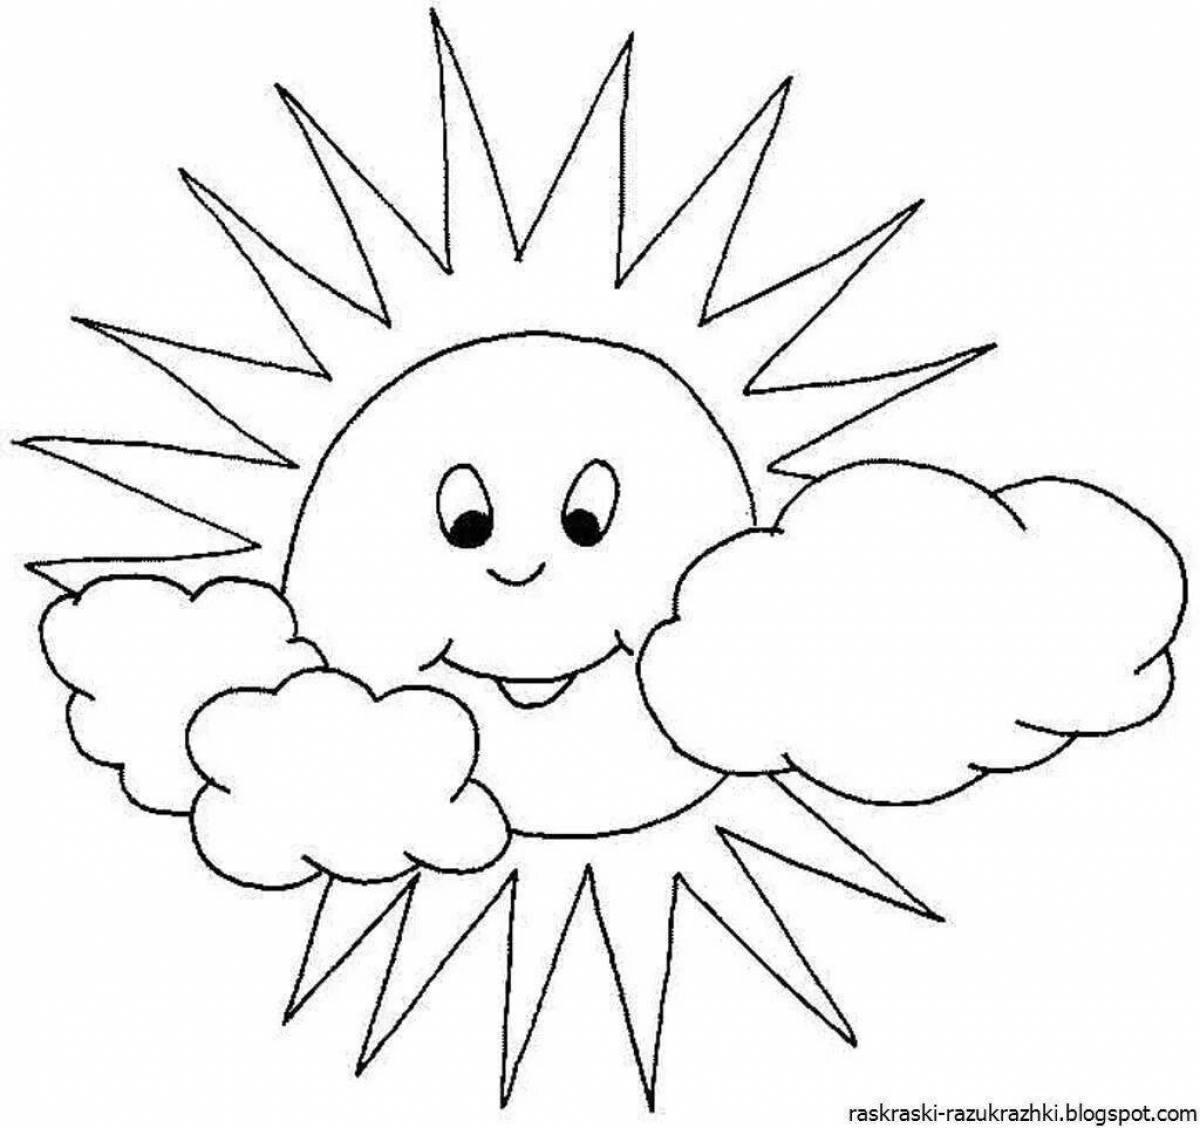 Innovative sun coloring book for 2-3 year olds